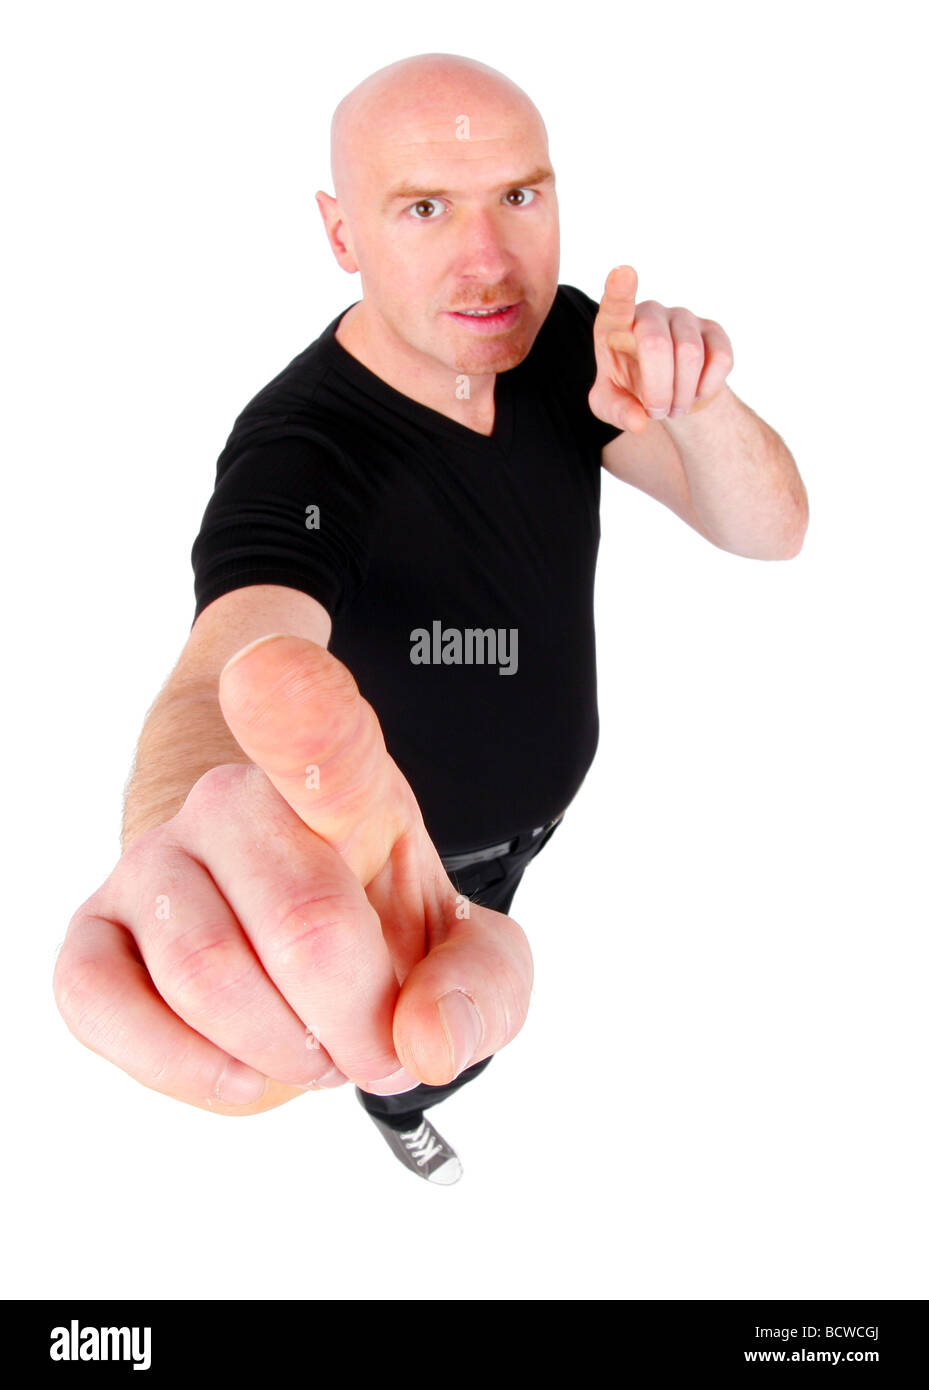 bald headed man is pointing his forefingers at the camera Stock Photo